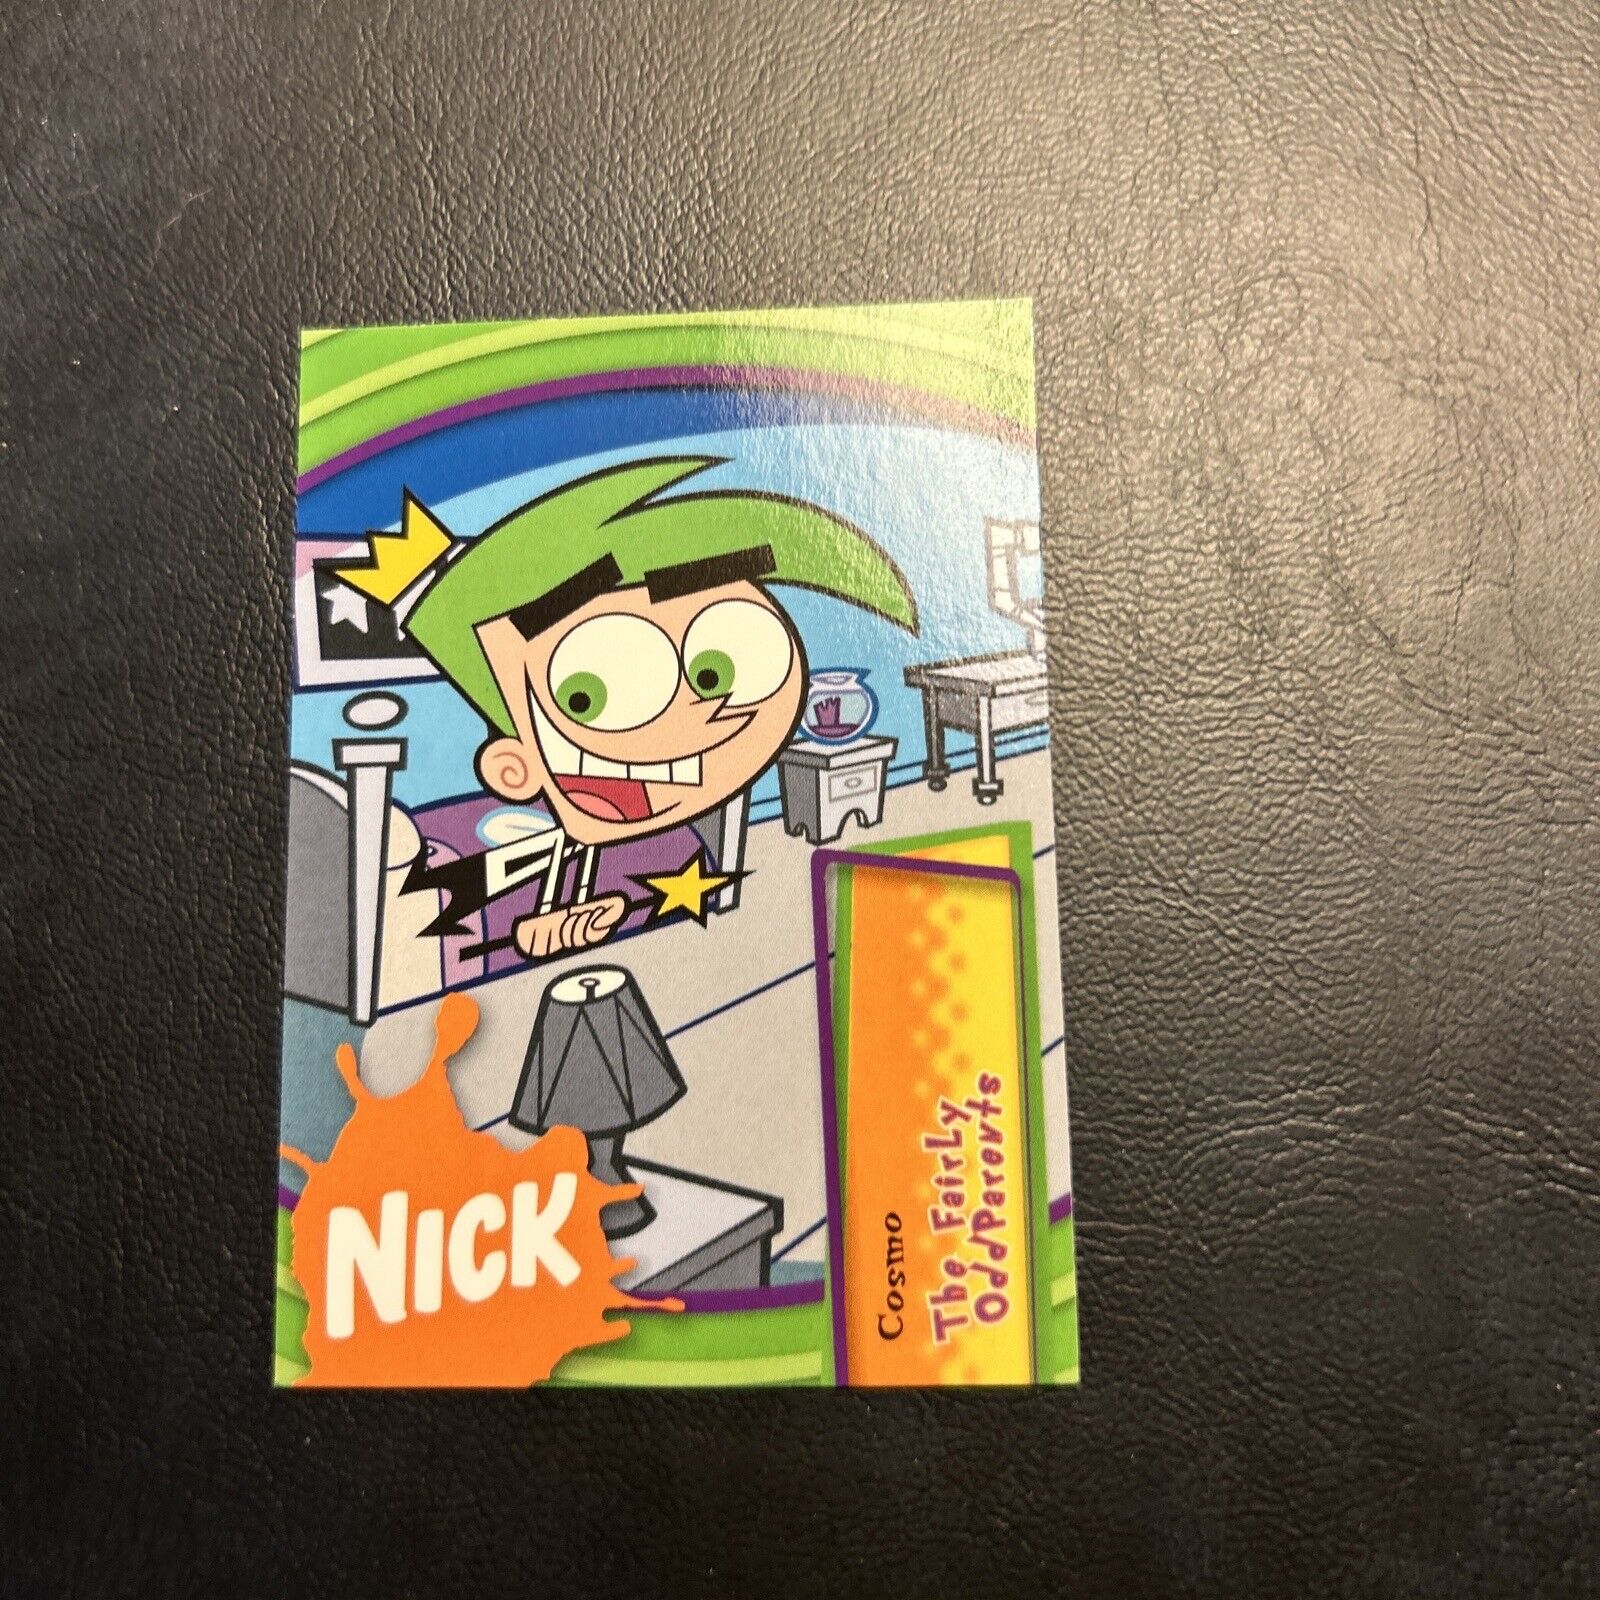 Jb11a Nicktoons 2004 Upper Deck NT-35 Cosmo The Fairly Odd Parents